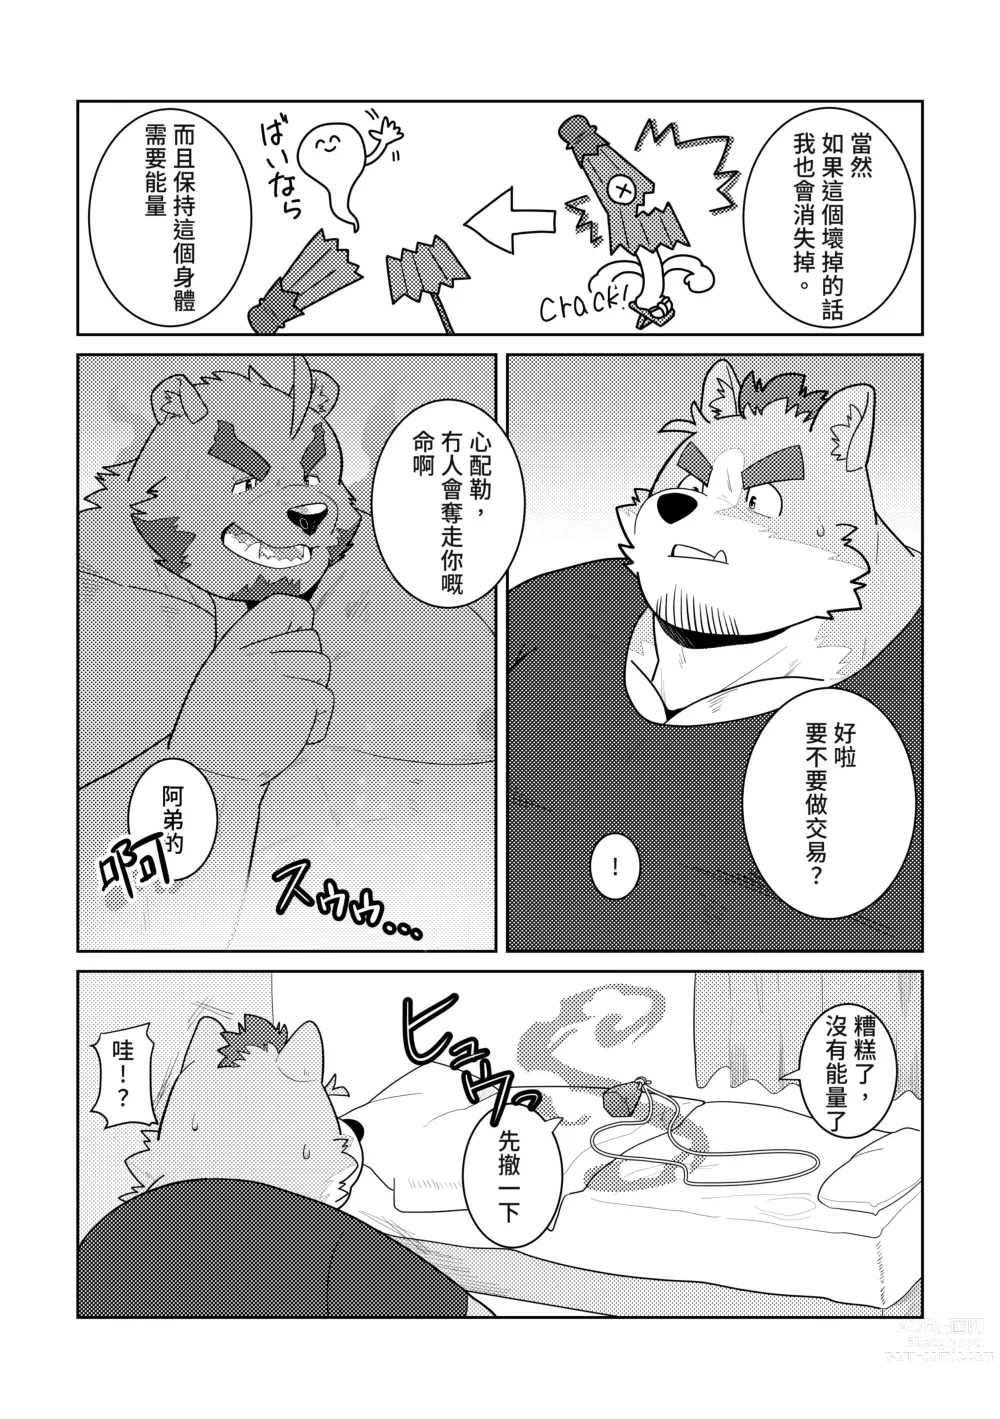 Page 9 of doujinshi 幽靈戀人